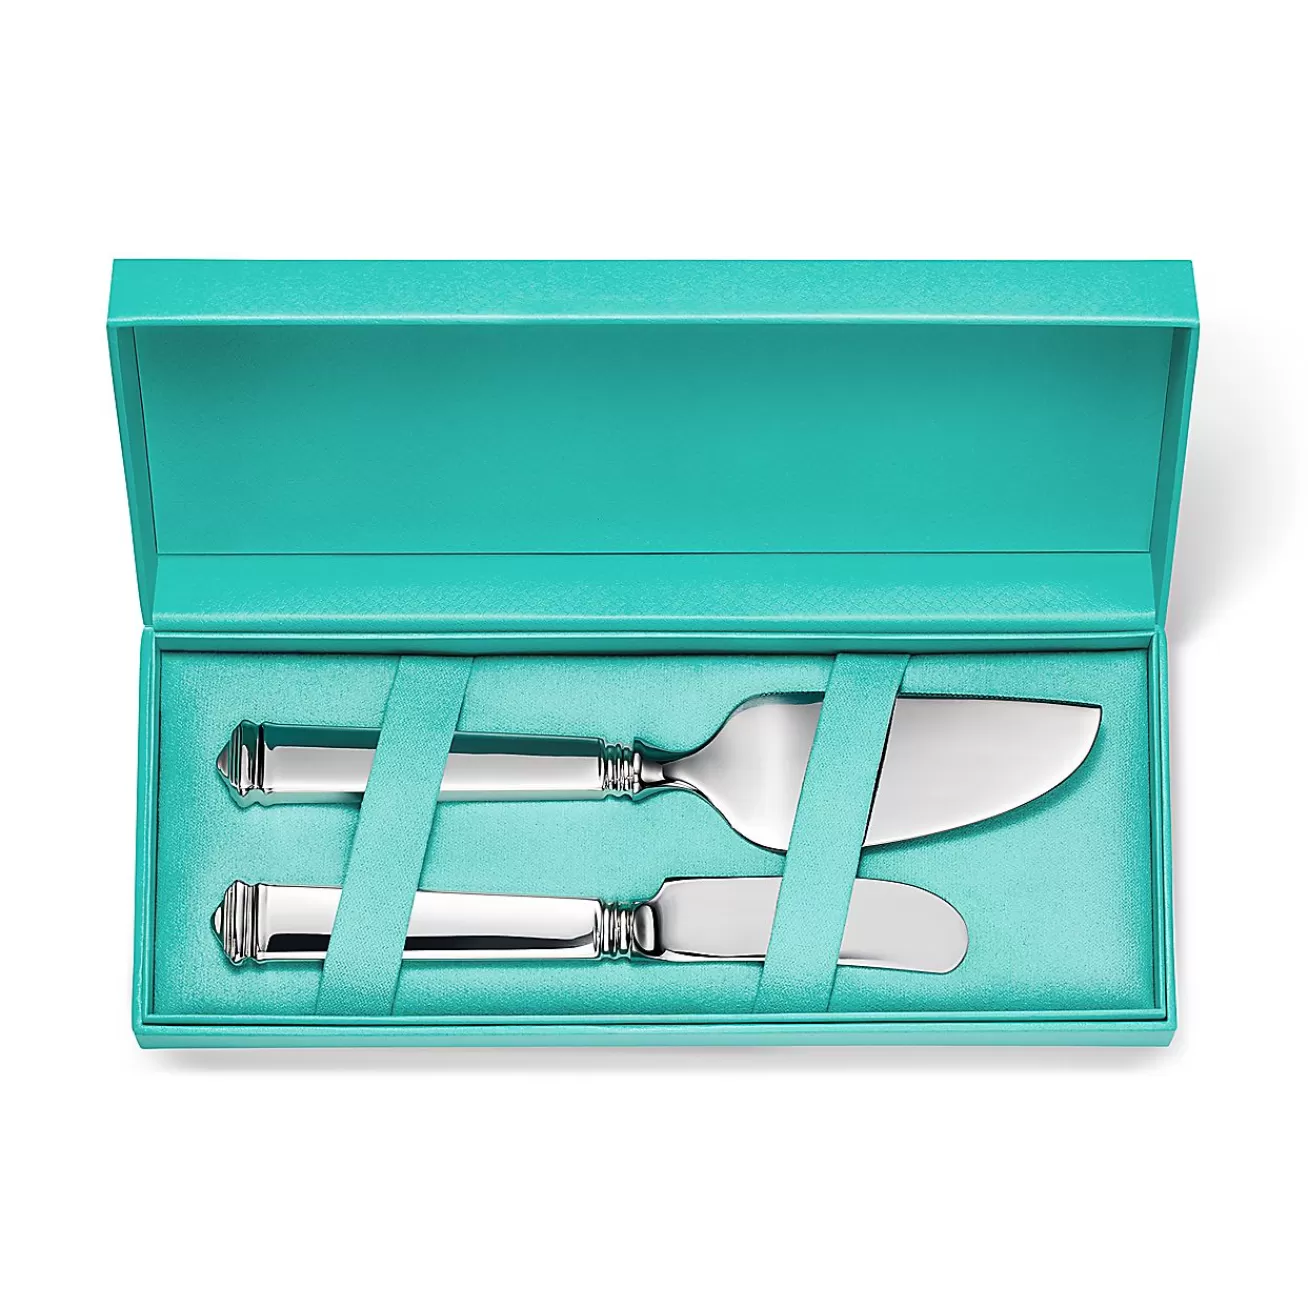 Tiffany & Co. Hampton cheese knife and server in sterling silver. | ^ Tableware | Flatware & Trays